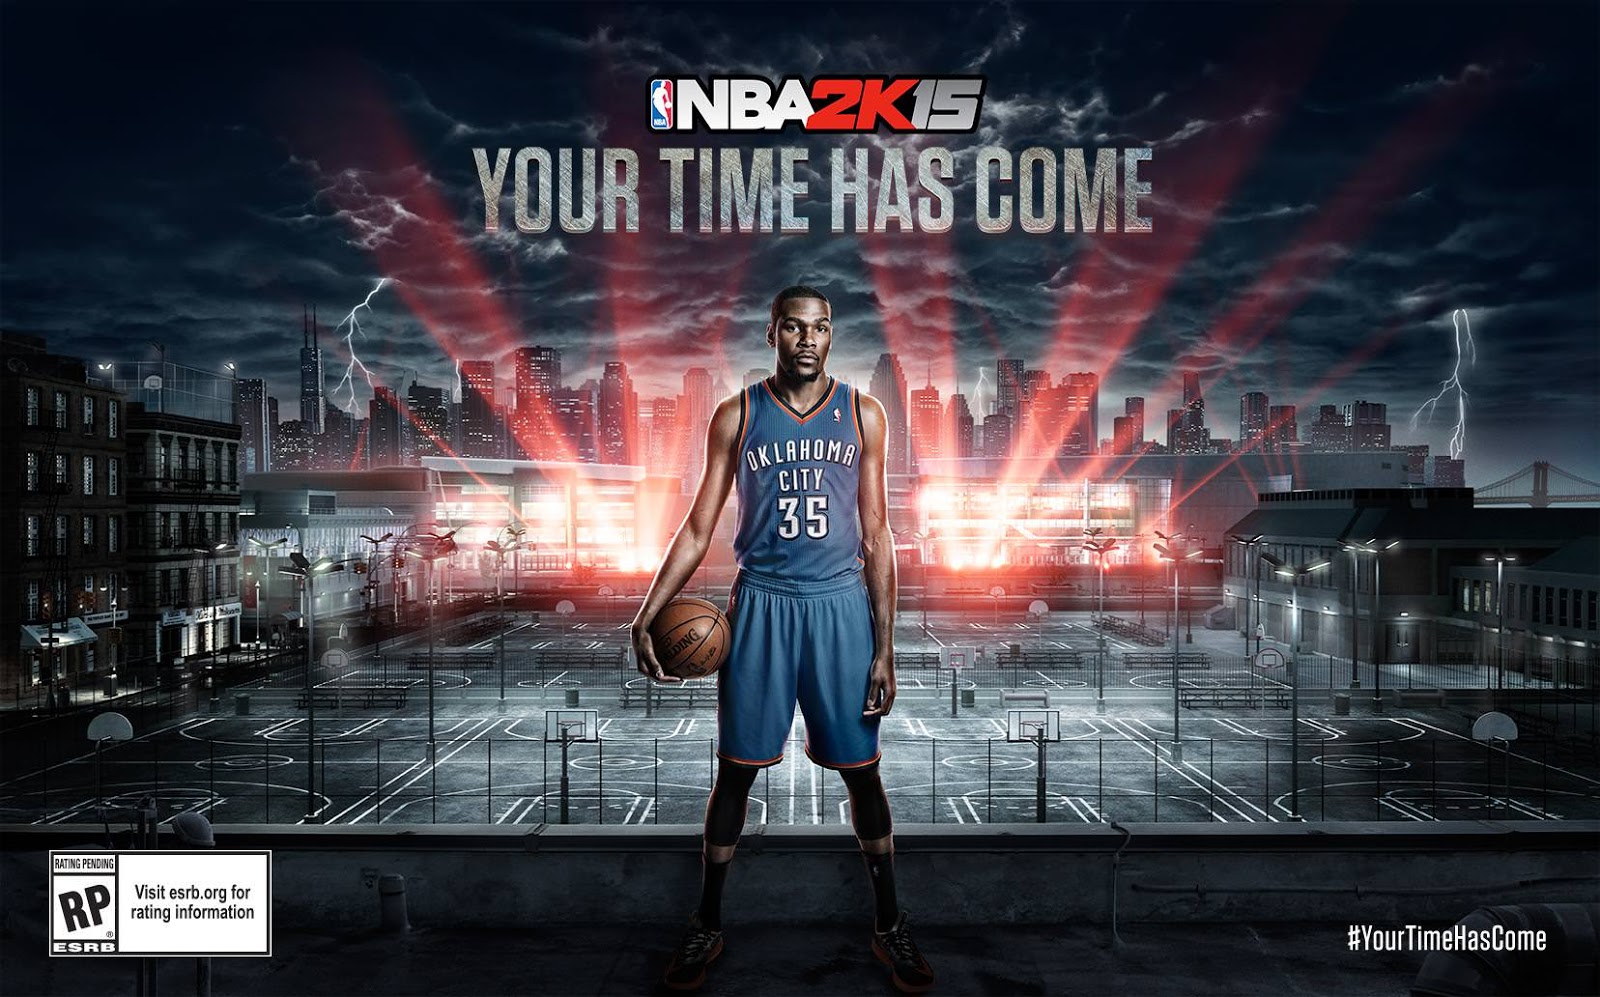 Kevin Durant announced NBA 2k15 Cover Athlete